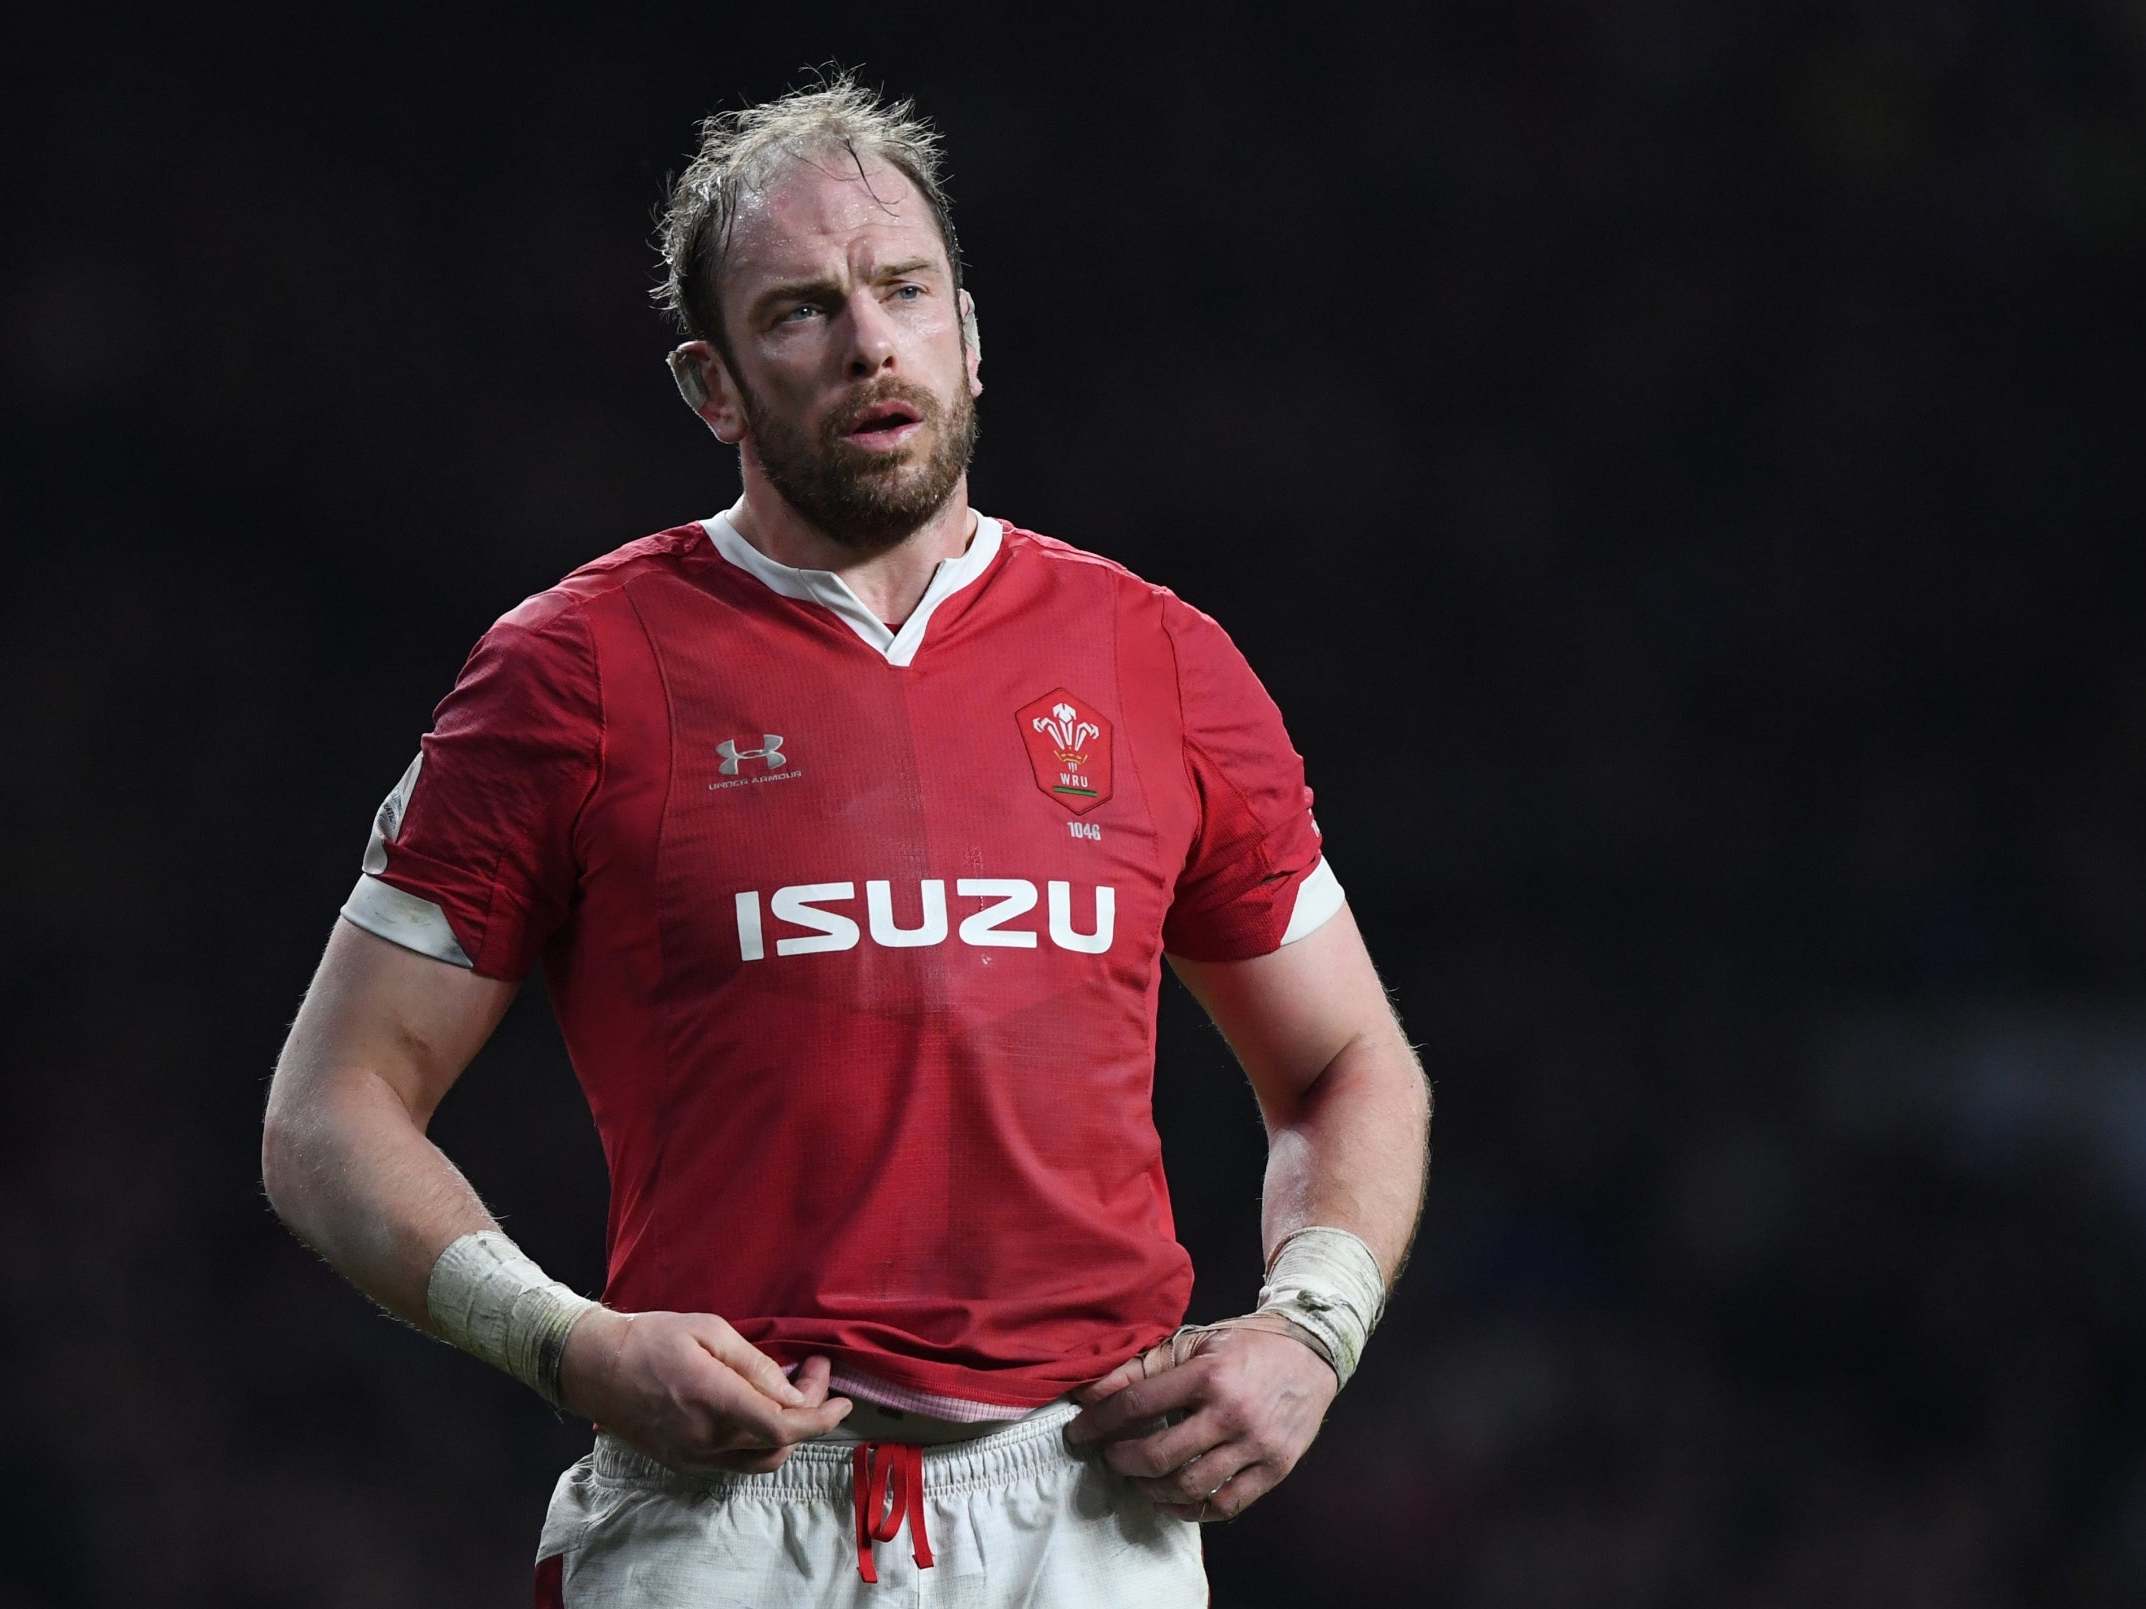 Alun Wyn Jones has called on World Rugby to take action against Joe Marler